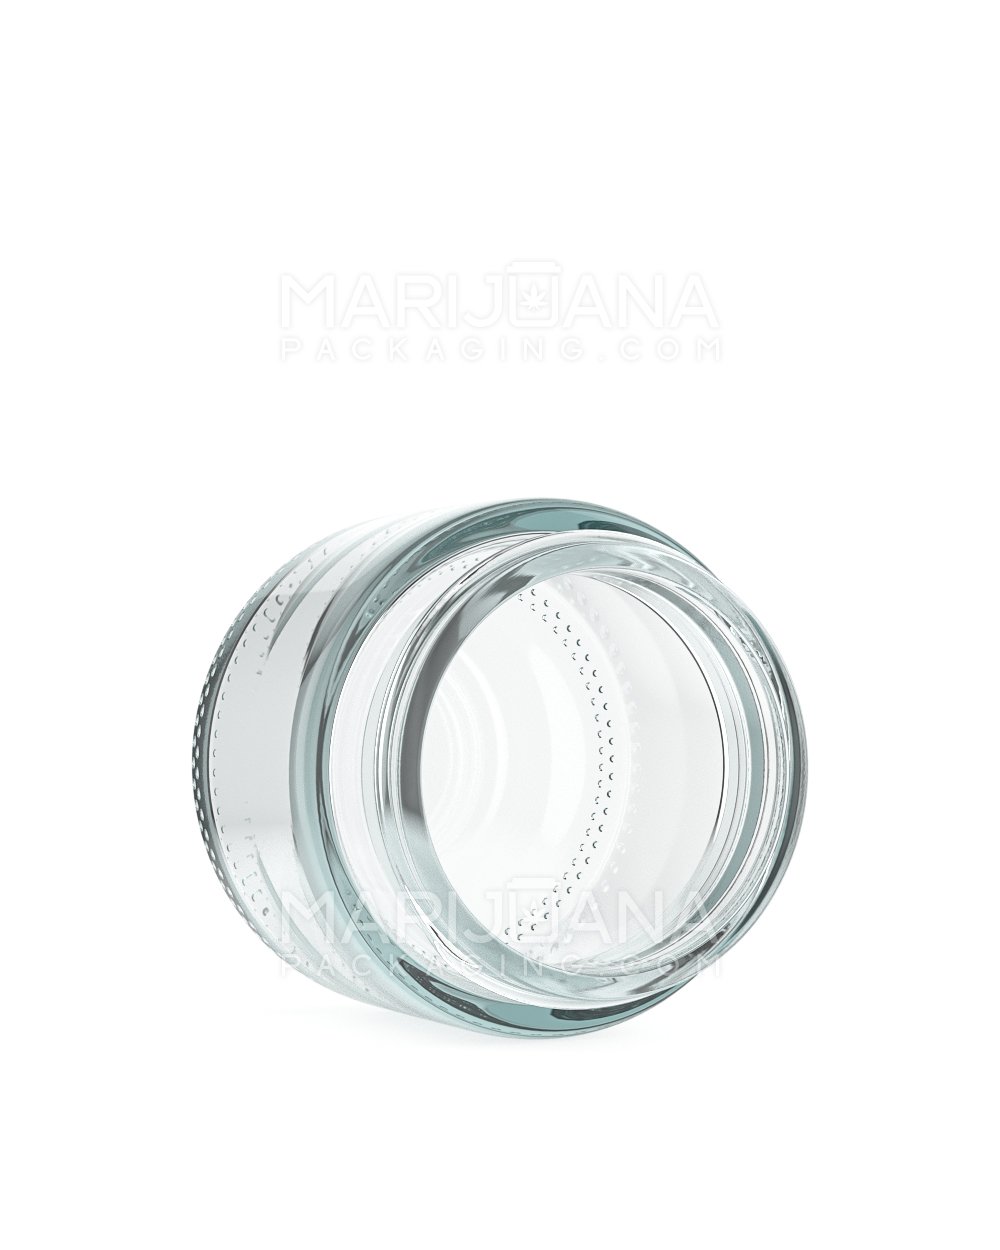 Straight Sided Clear Glass Jars | 53mm - 2.5oz - 32 Count - 4